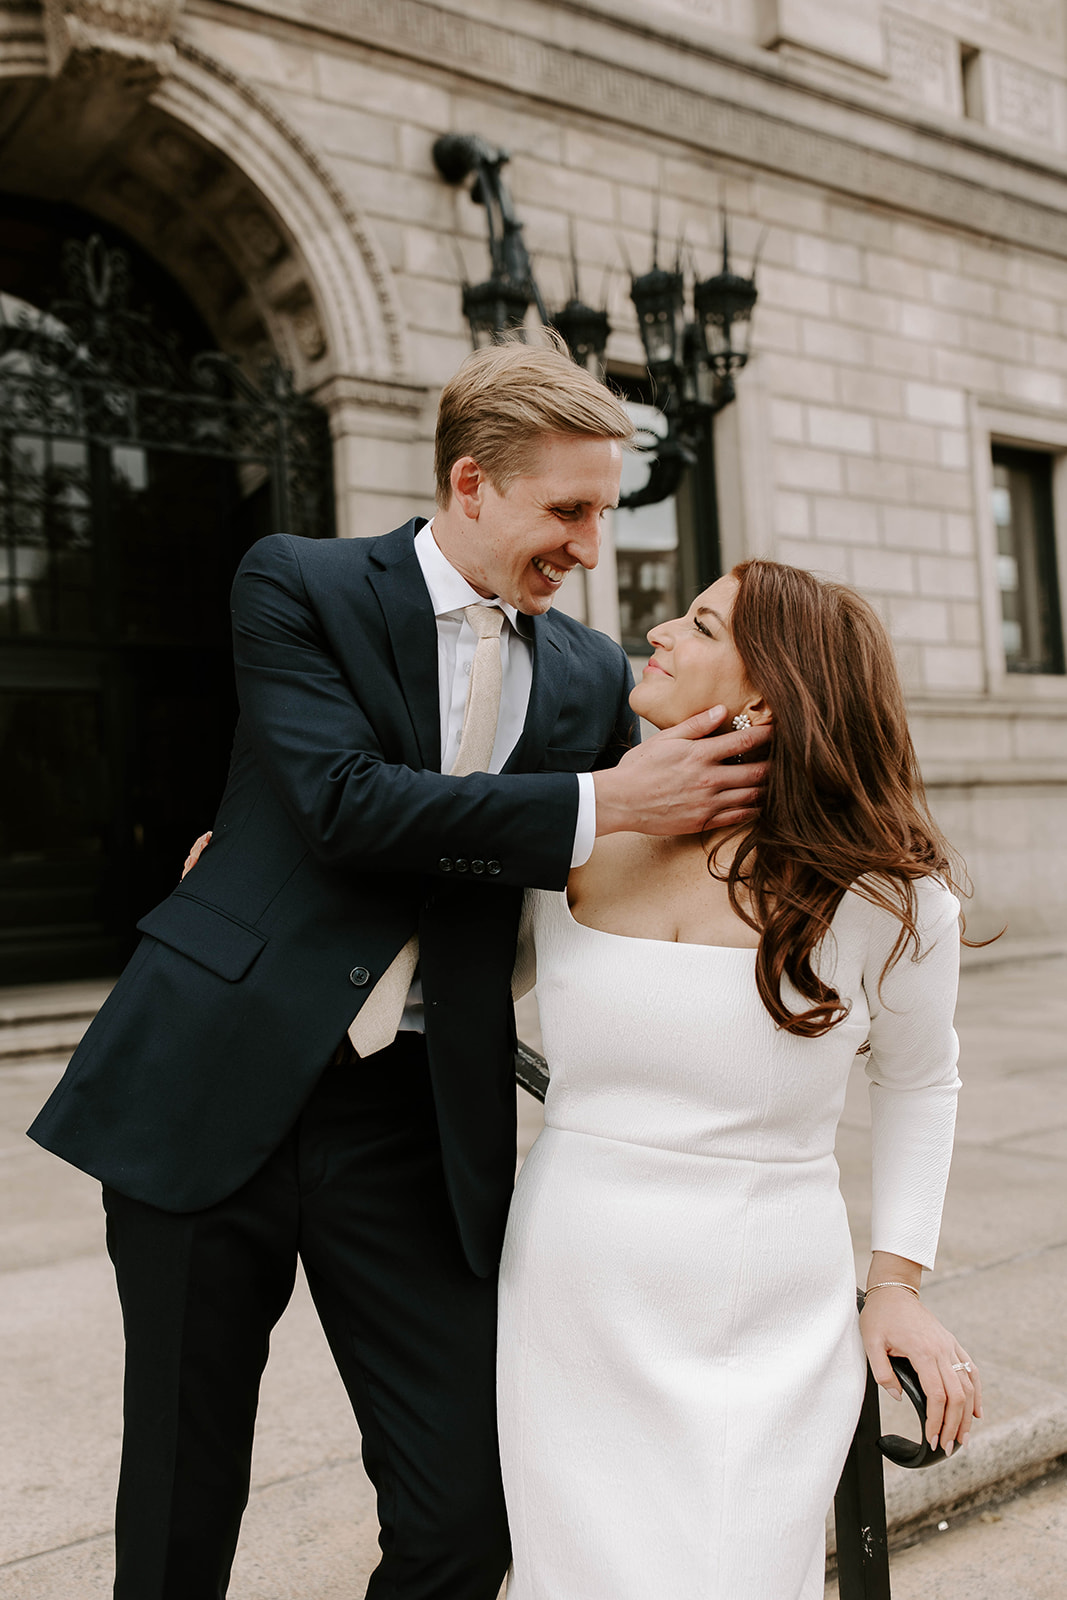 Stunning bride and groom pose together in front of the Boston public library